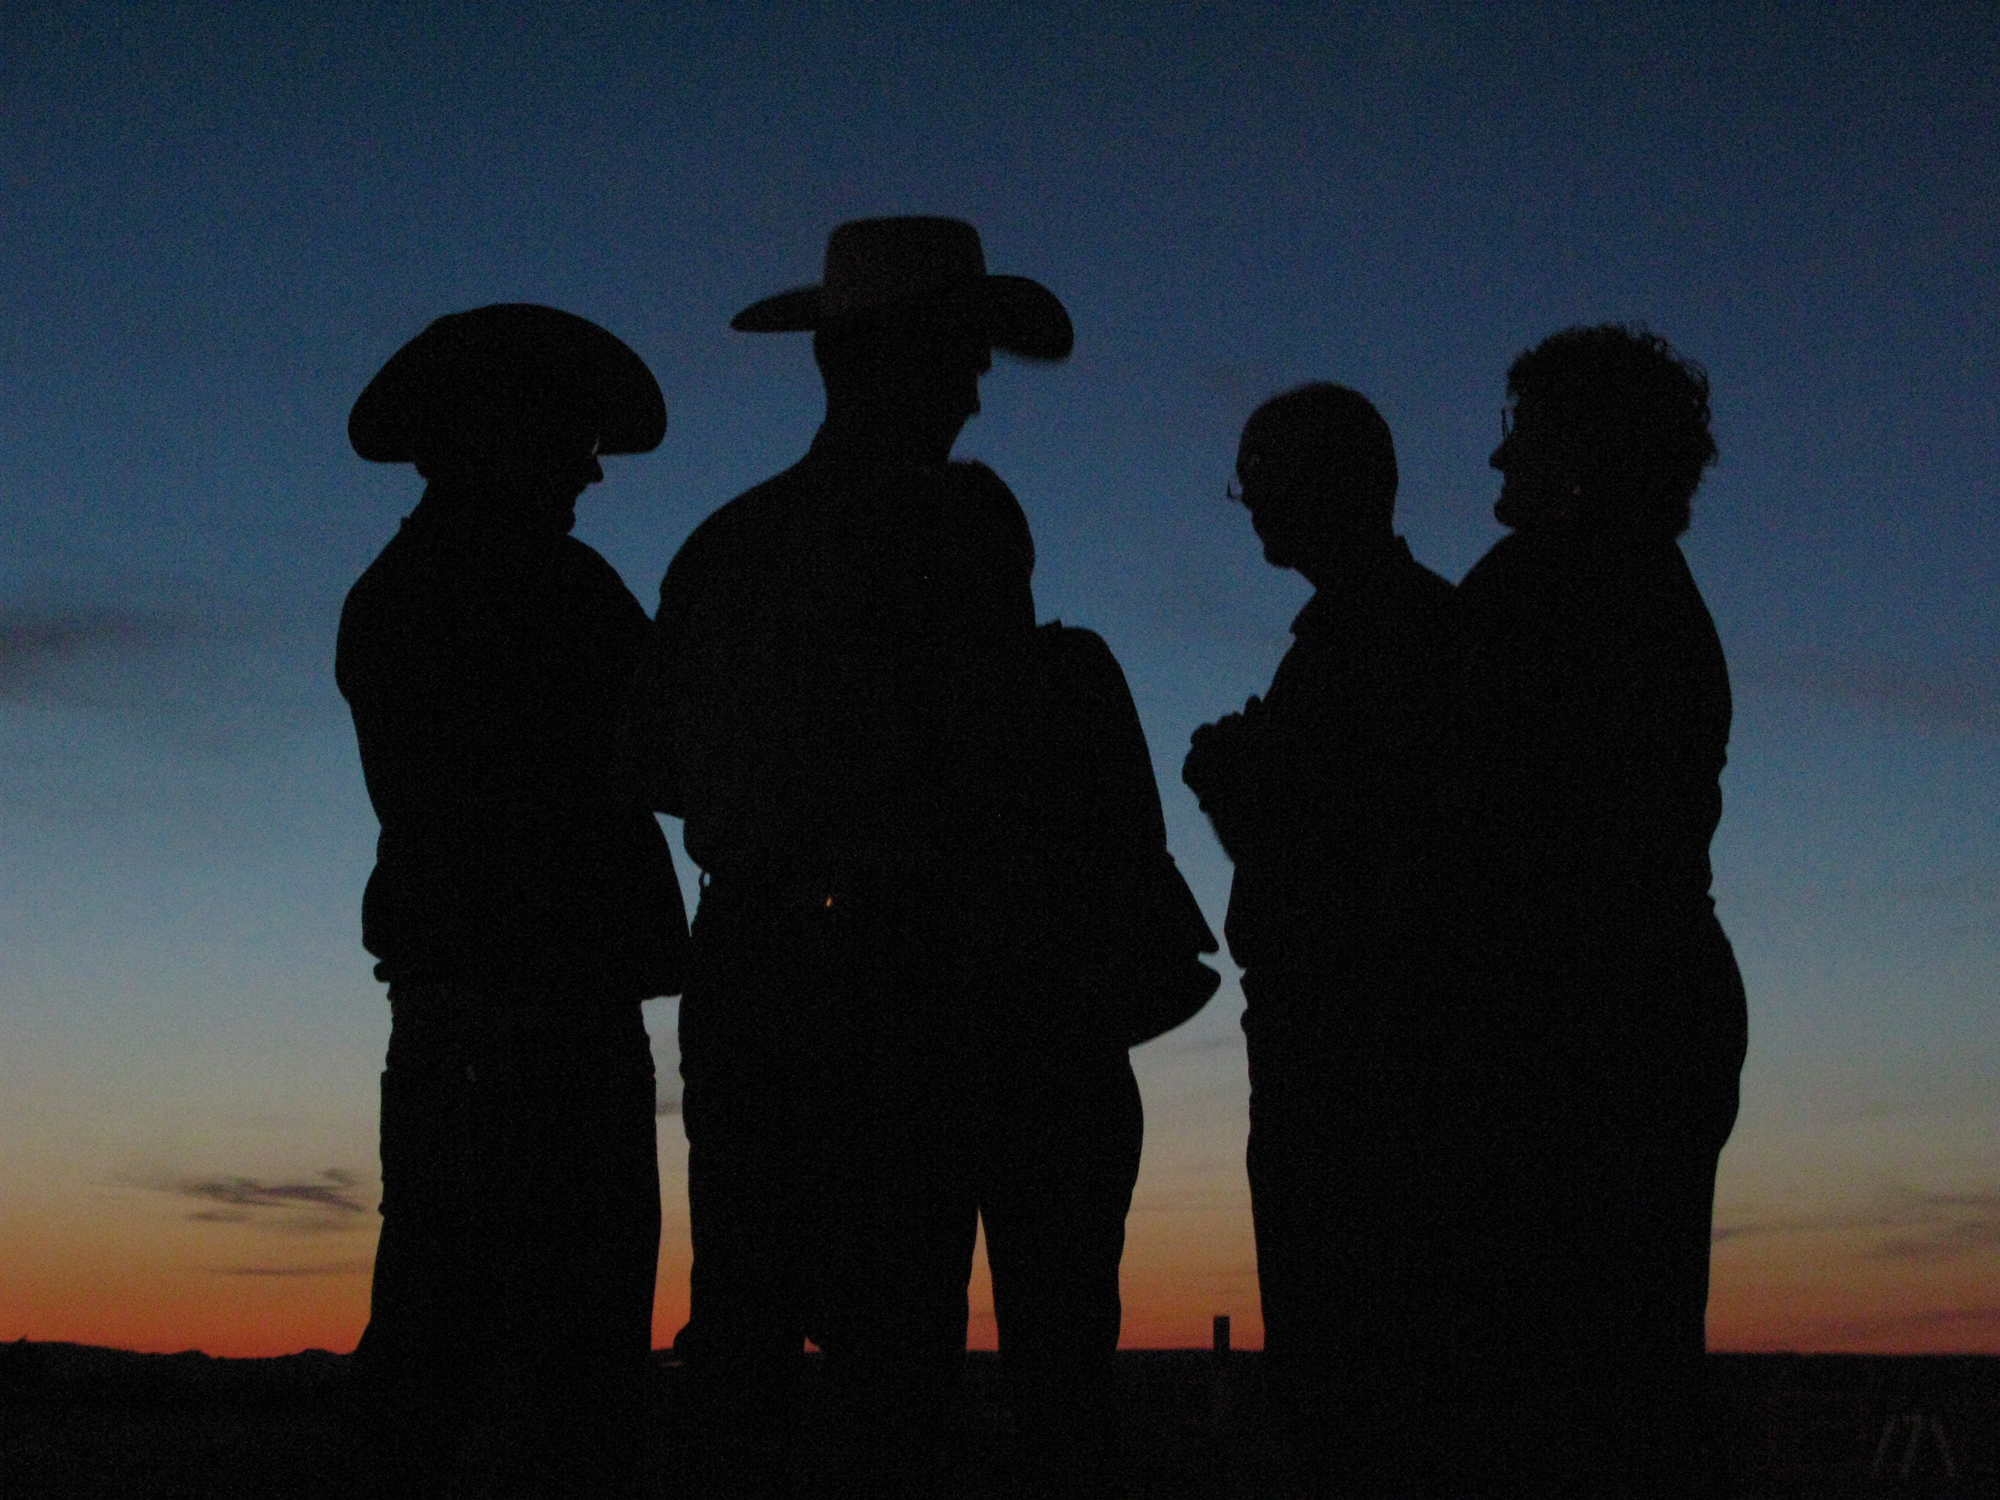 Several people are silhouetted against a dusk sky with a low-setting sun casting an orange glow on the horizon.